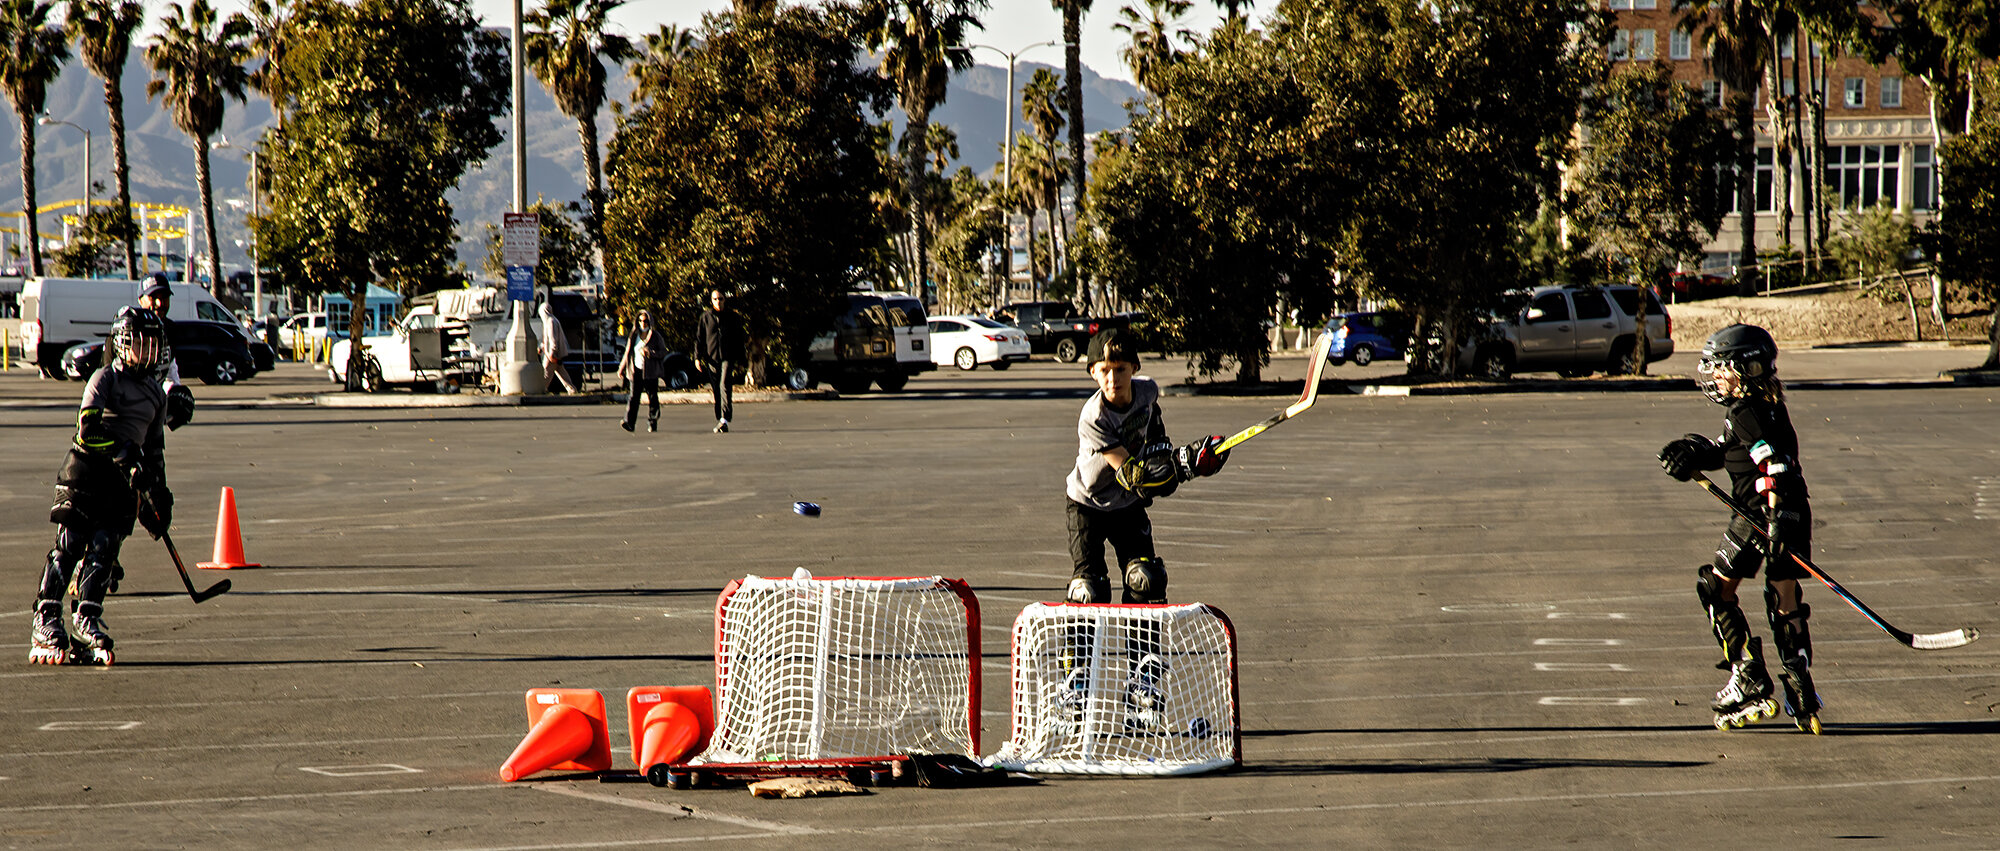  Youngsters at roller hockey practice with their coach in a beach parking lot, in Santa Monica, Calif., on Thursday, December 31, 2020. 